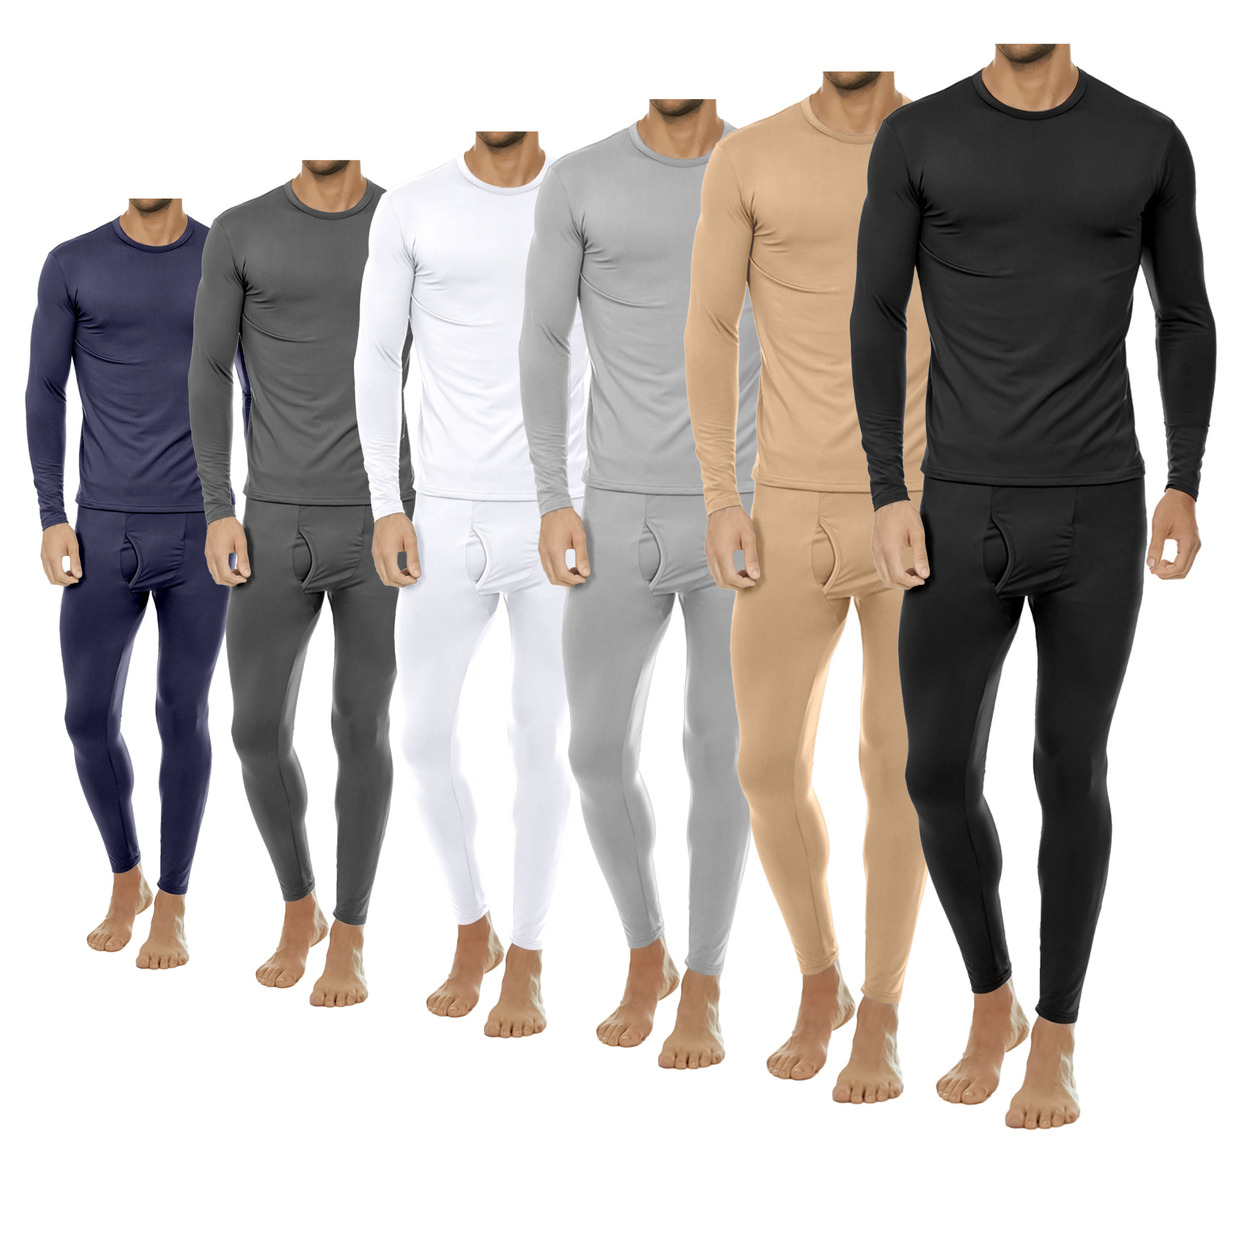 2-Sets: Men's Winter Warm Fleece Lined Thermal Underwear Set For Cold Weather - Grey&navy, Large